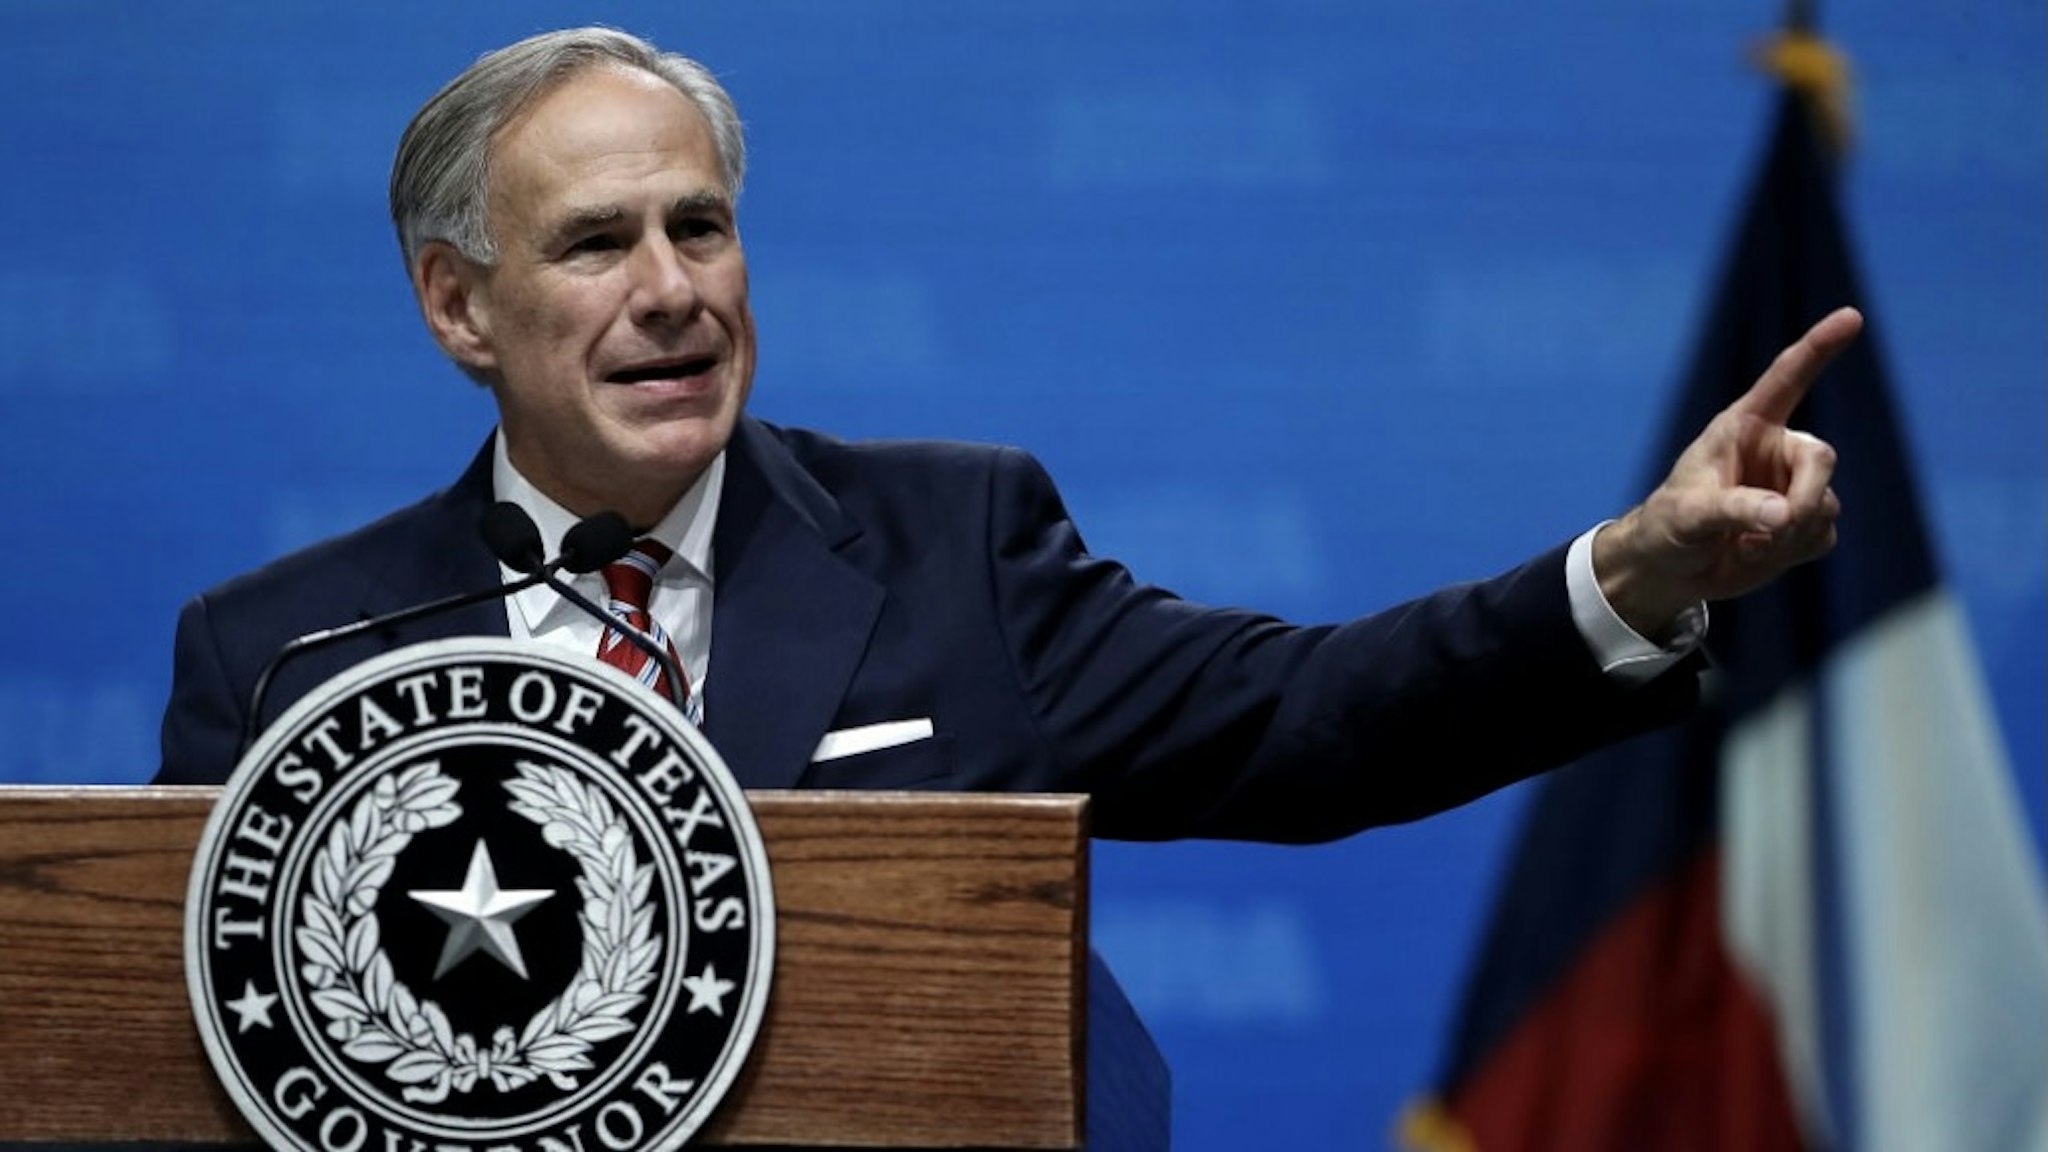 National Rifle Association Holds Its Annual Conference In Dallas, Texas DALLAS, TX - MAY 04: Texas Gov. Greg Abbott speaks at the NRA-ILA Leadership Forum during the NRA Annual Meeting & Exhibits at the Kay Bailey Hutchison Convention Center on May 4, 2018 in Dallas, Texas. The National Rifle Association's annual meeting and exhibit runs through Sunday. (Photo by Justin Sullivan/Getty Images) Justin Sullivan / Staff via Getty Images